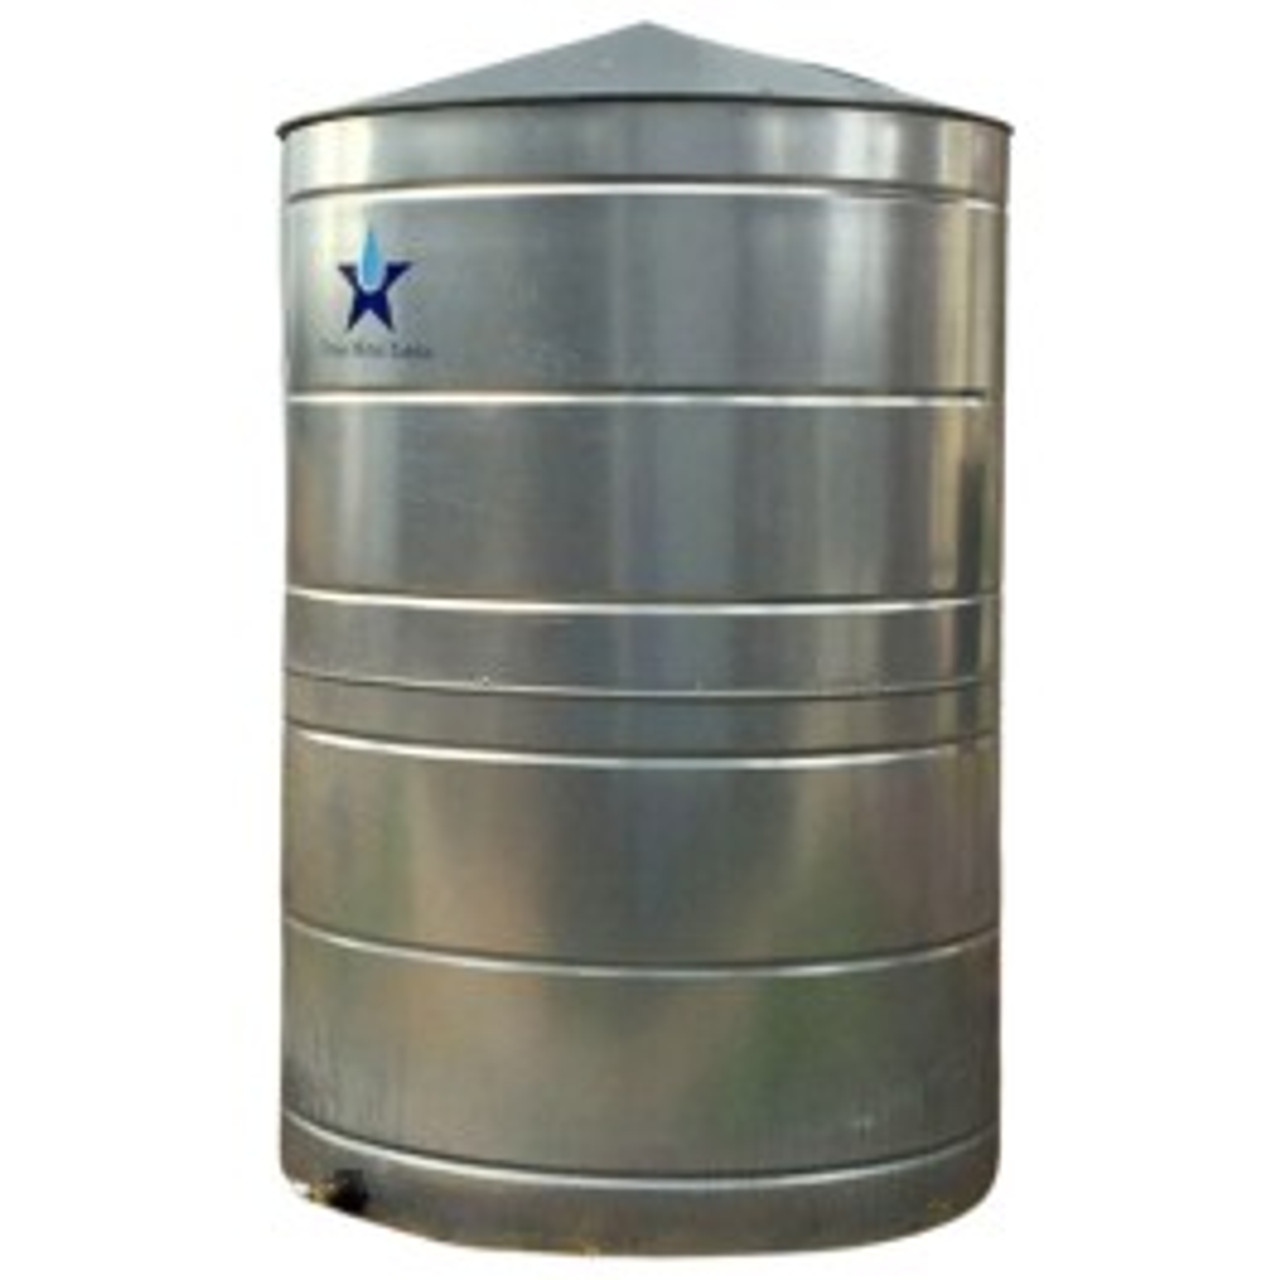 An image of a 400 Gallon Texas Metal Tanks Galvanized Vertical Water Tank | WT400G